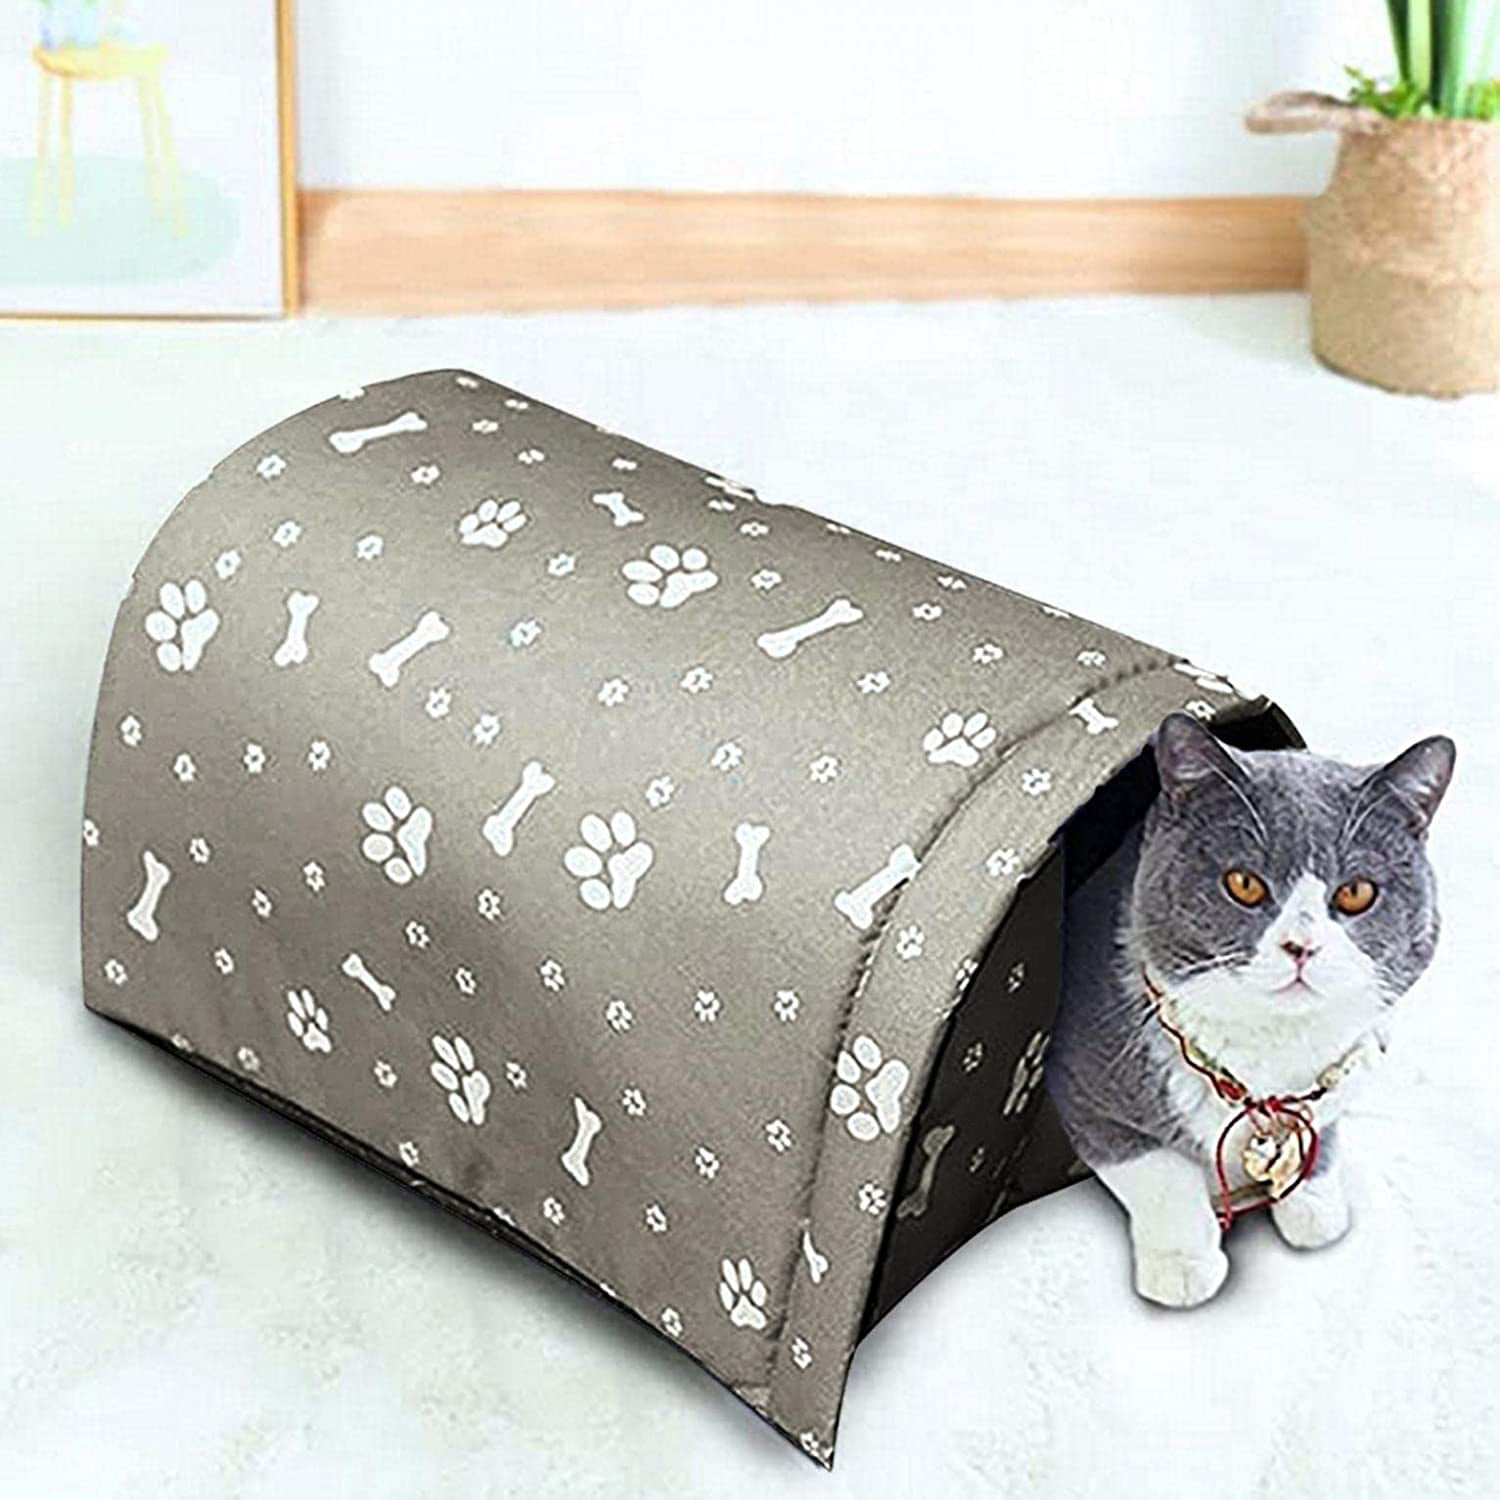 L Pets House Outdoor Waterproof Cat House Thickened Weatherproof Foldable Cat Dog Tent Cabin Winter Warm Stray Cats Shelter for Outdoor Feral Cat Dog Puppy